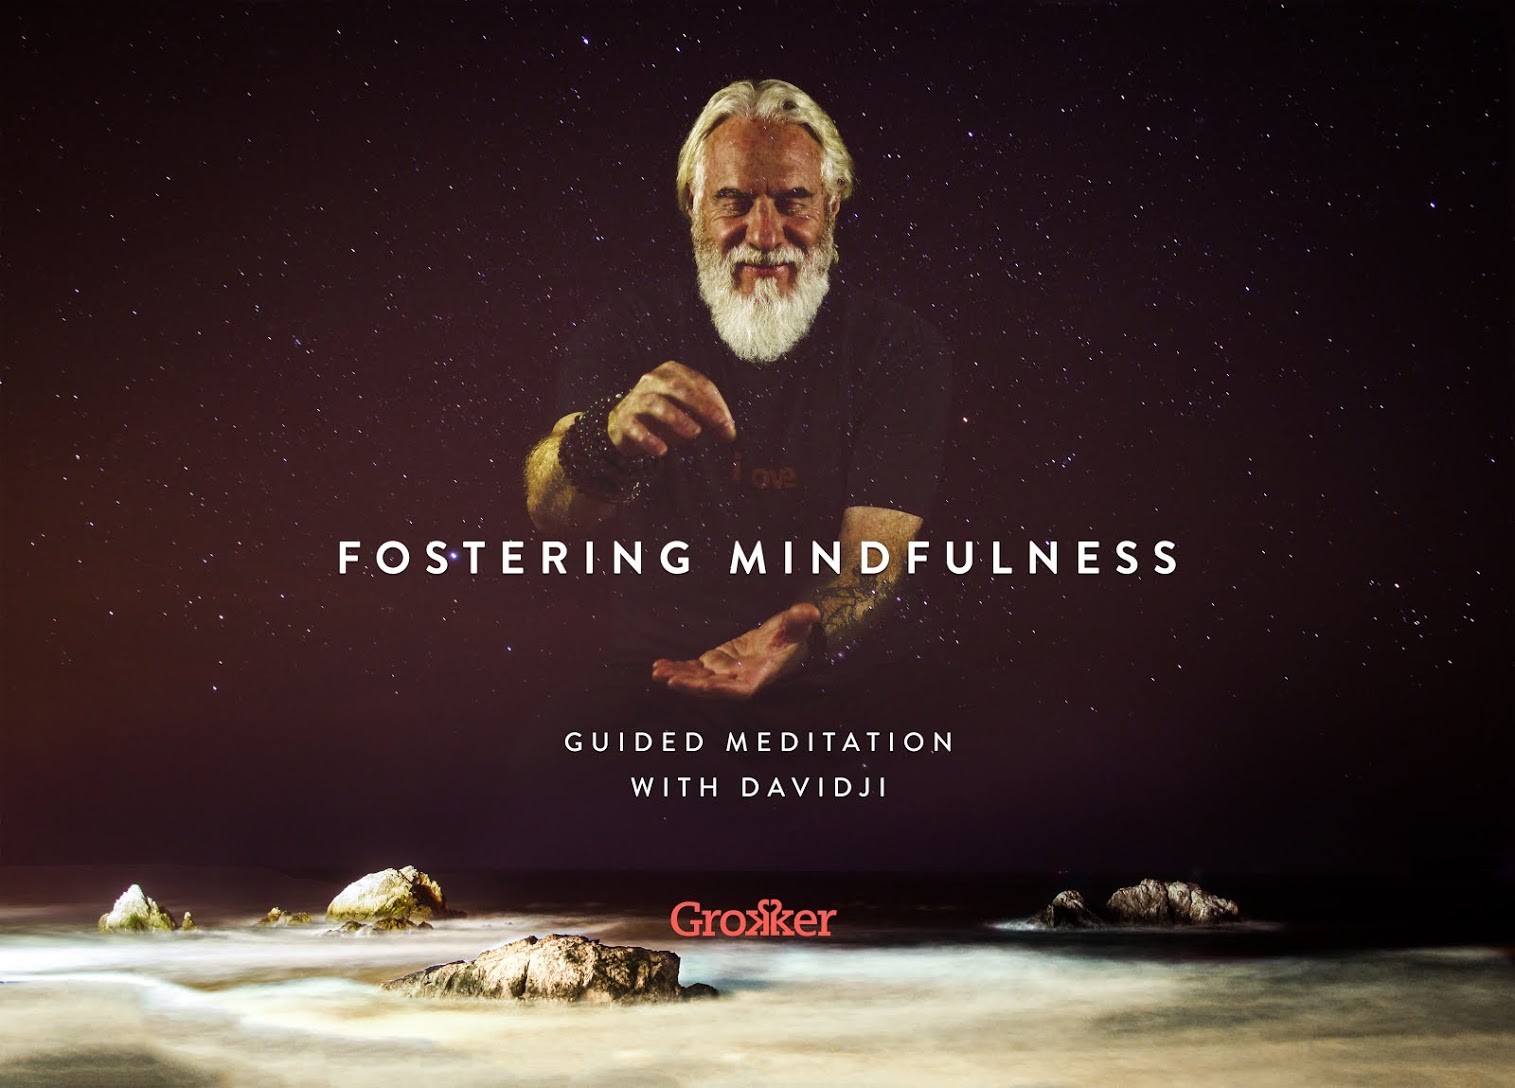 My 5-Part Guided Video Meditation Series from grokker.com